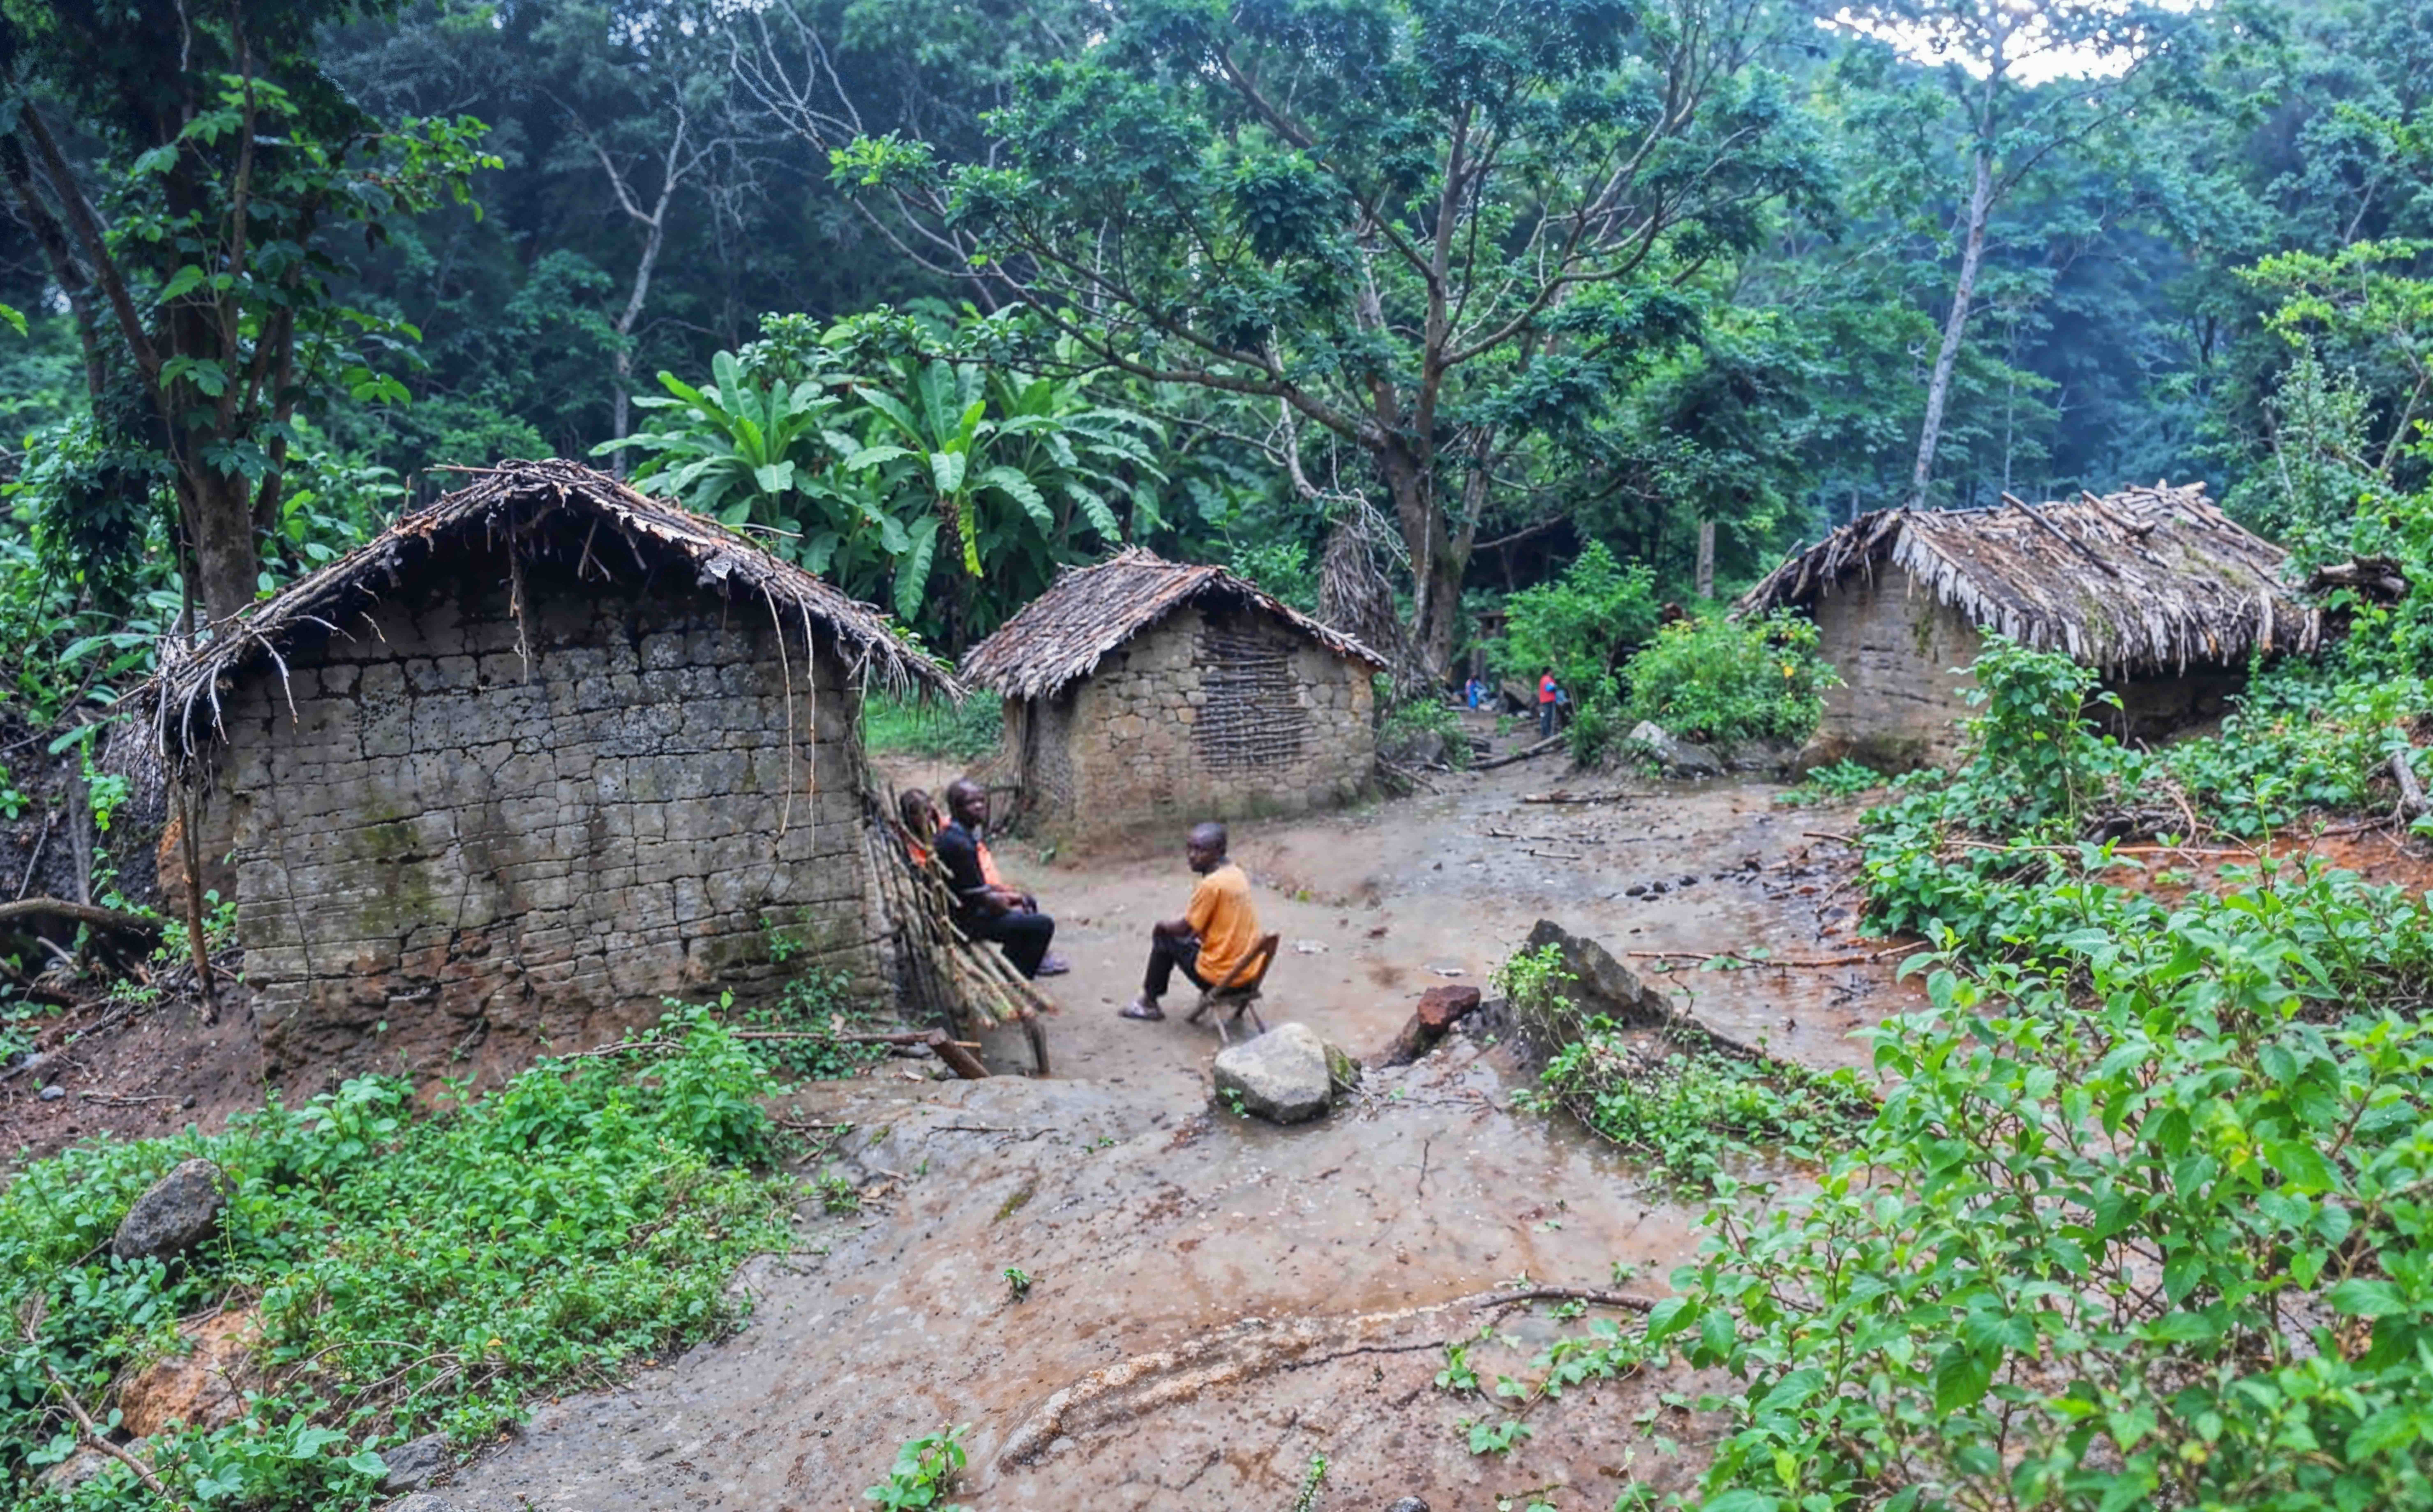 A camp in Banamwesi forest for the community monitoring team. Image courtesy of a local source.